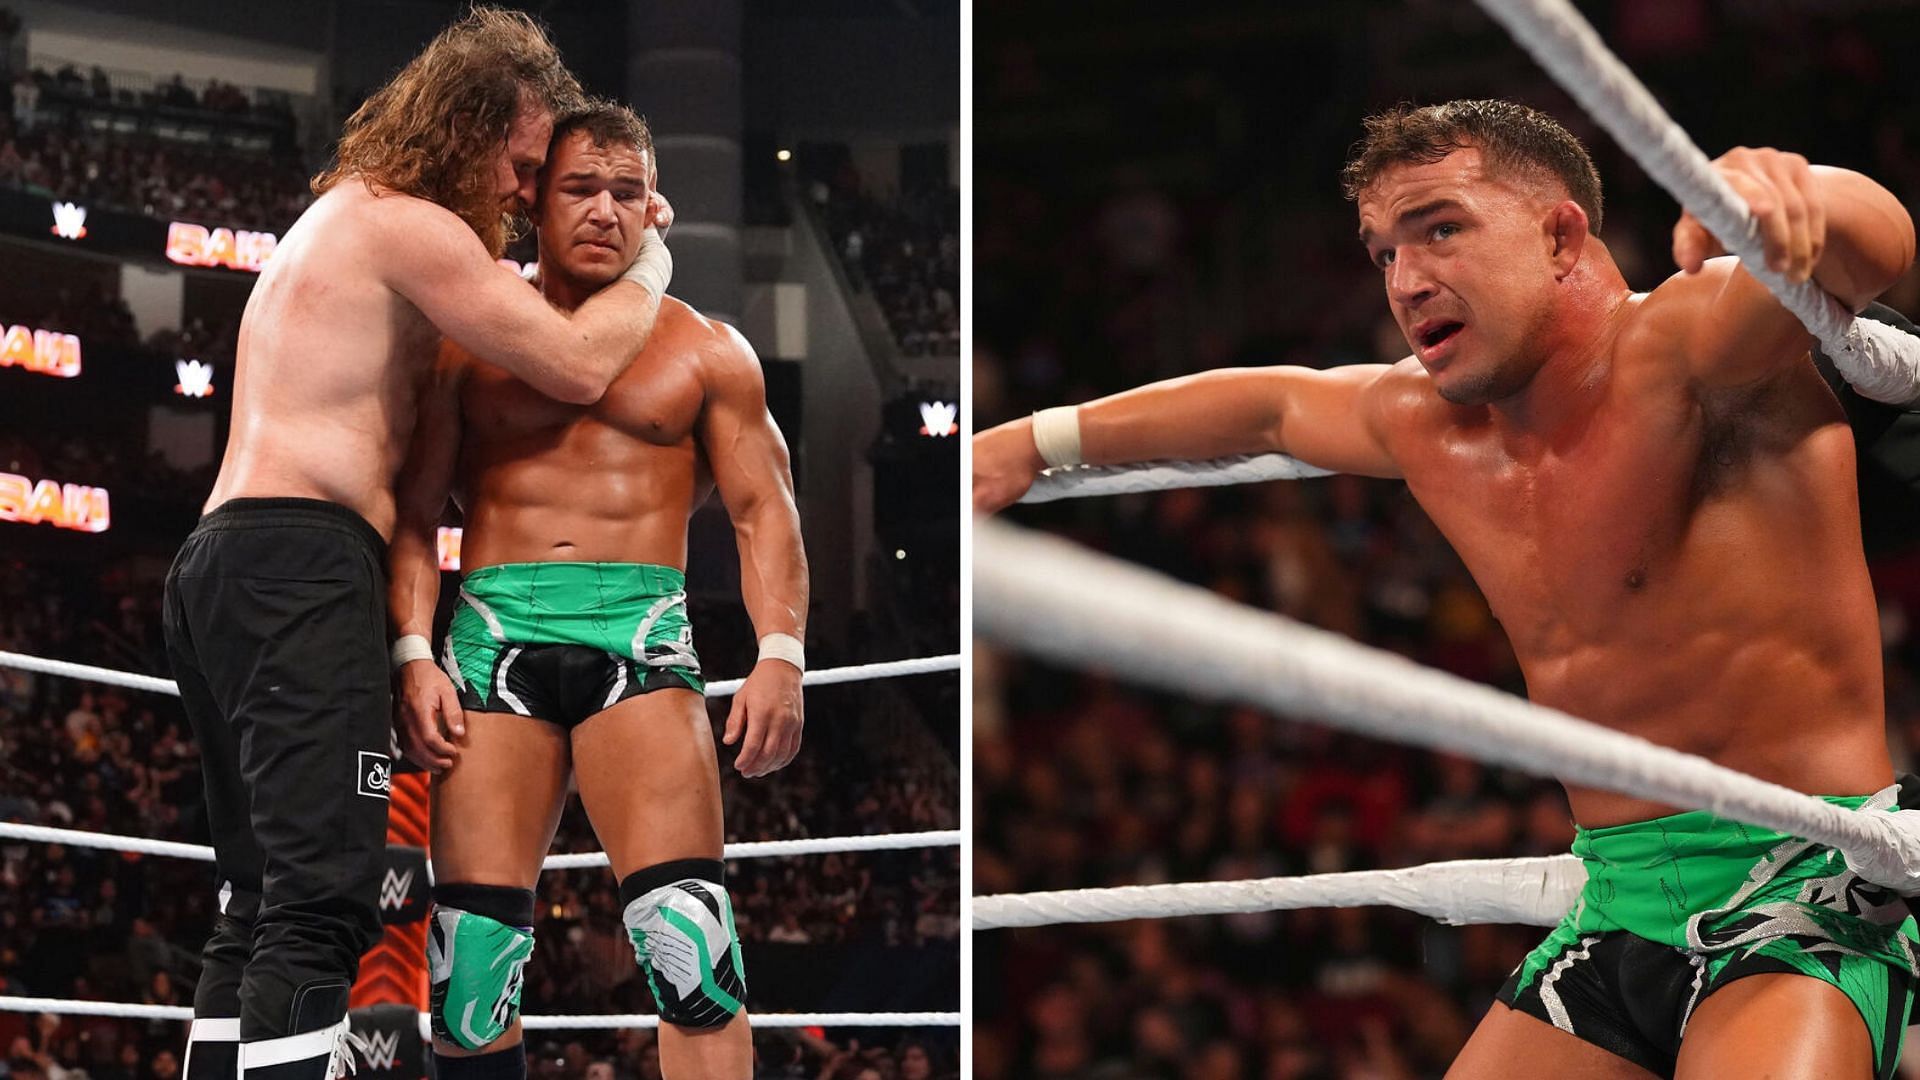 Chad Gable and Sami Zayn participated in a Gauntlet Match on RAW [Image credits: wwe.com]